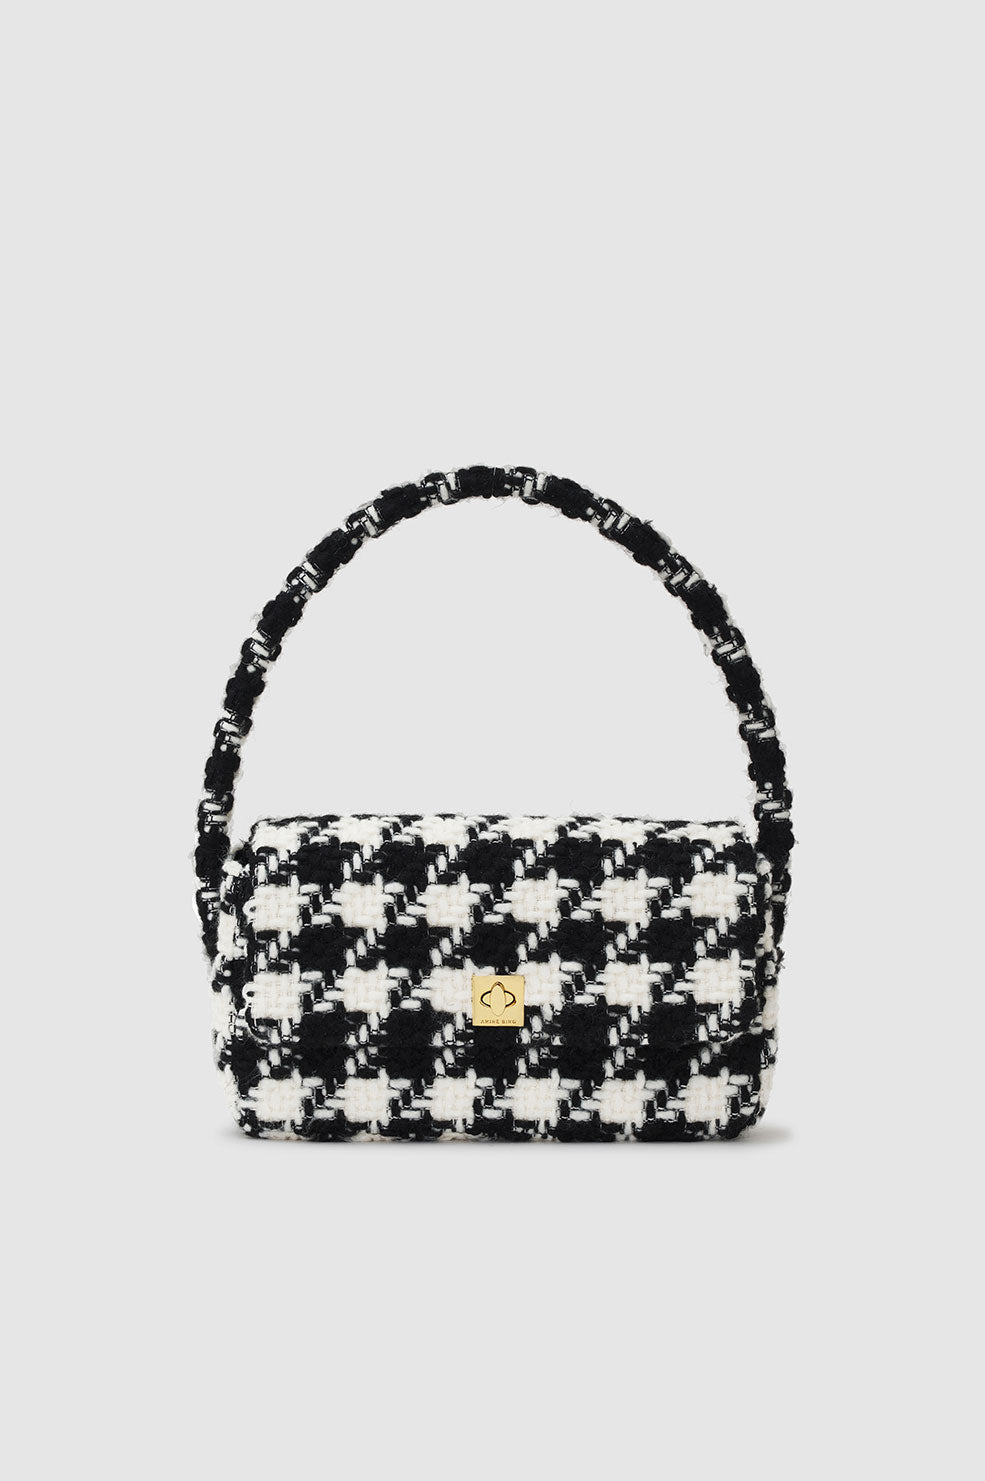 Clare V, Bags, Clare V Snakeskin Attach Tote Wmiddle Stripe